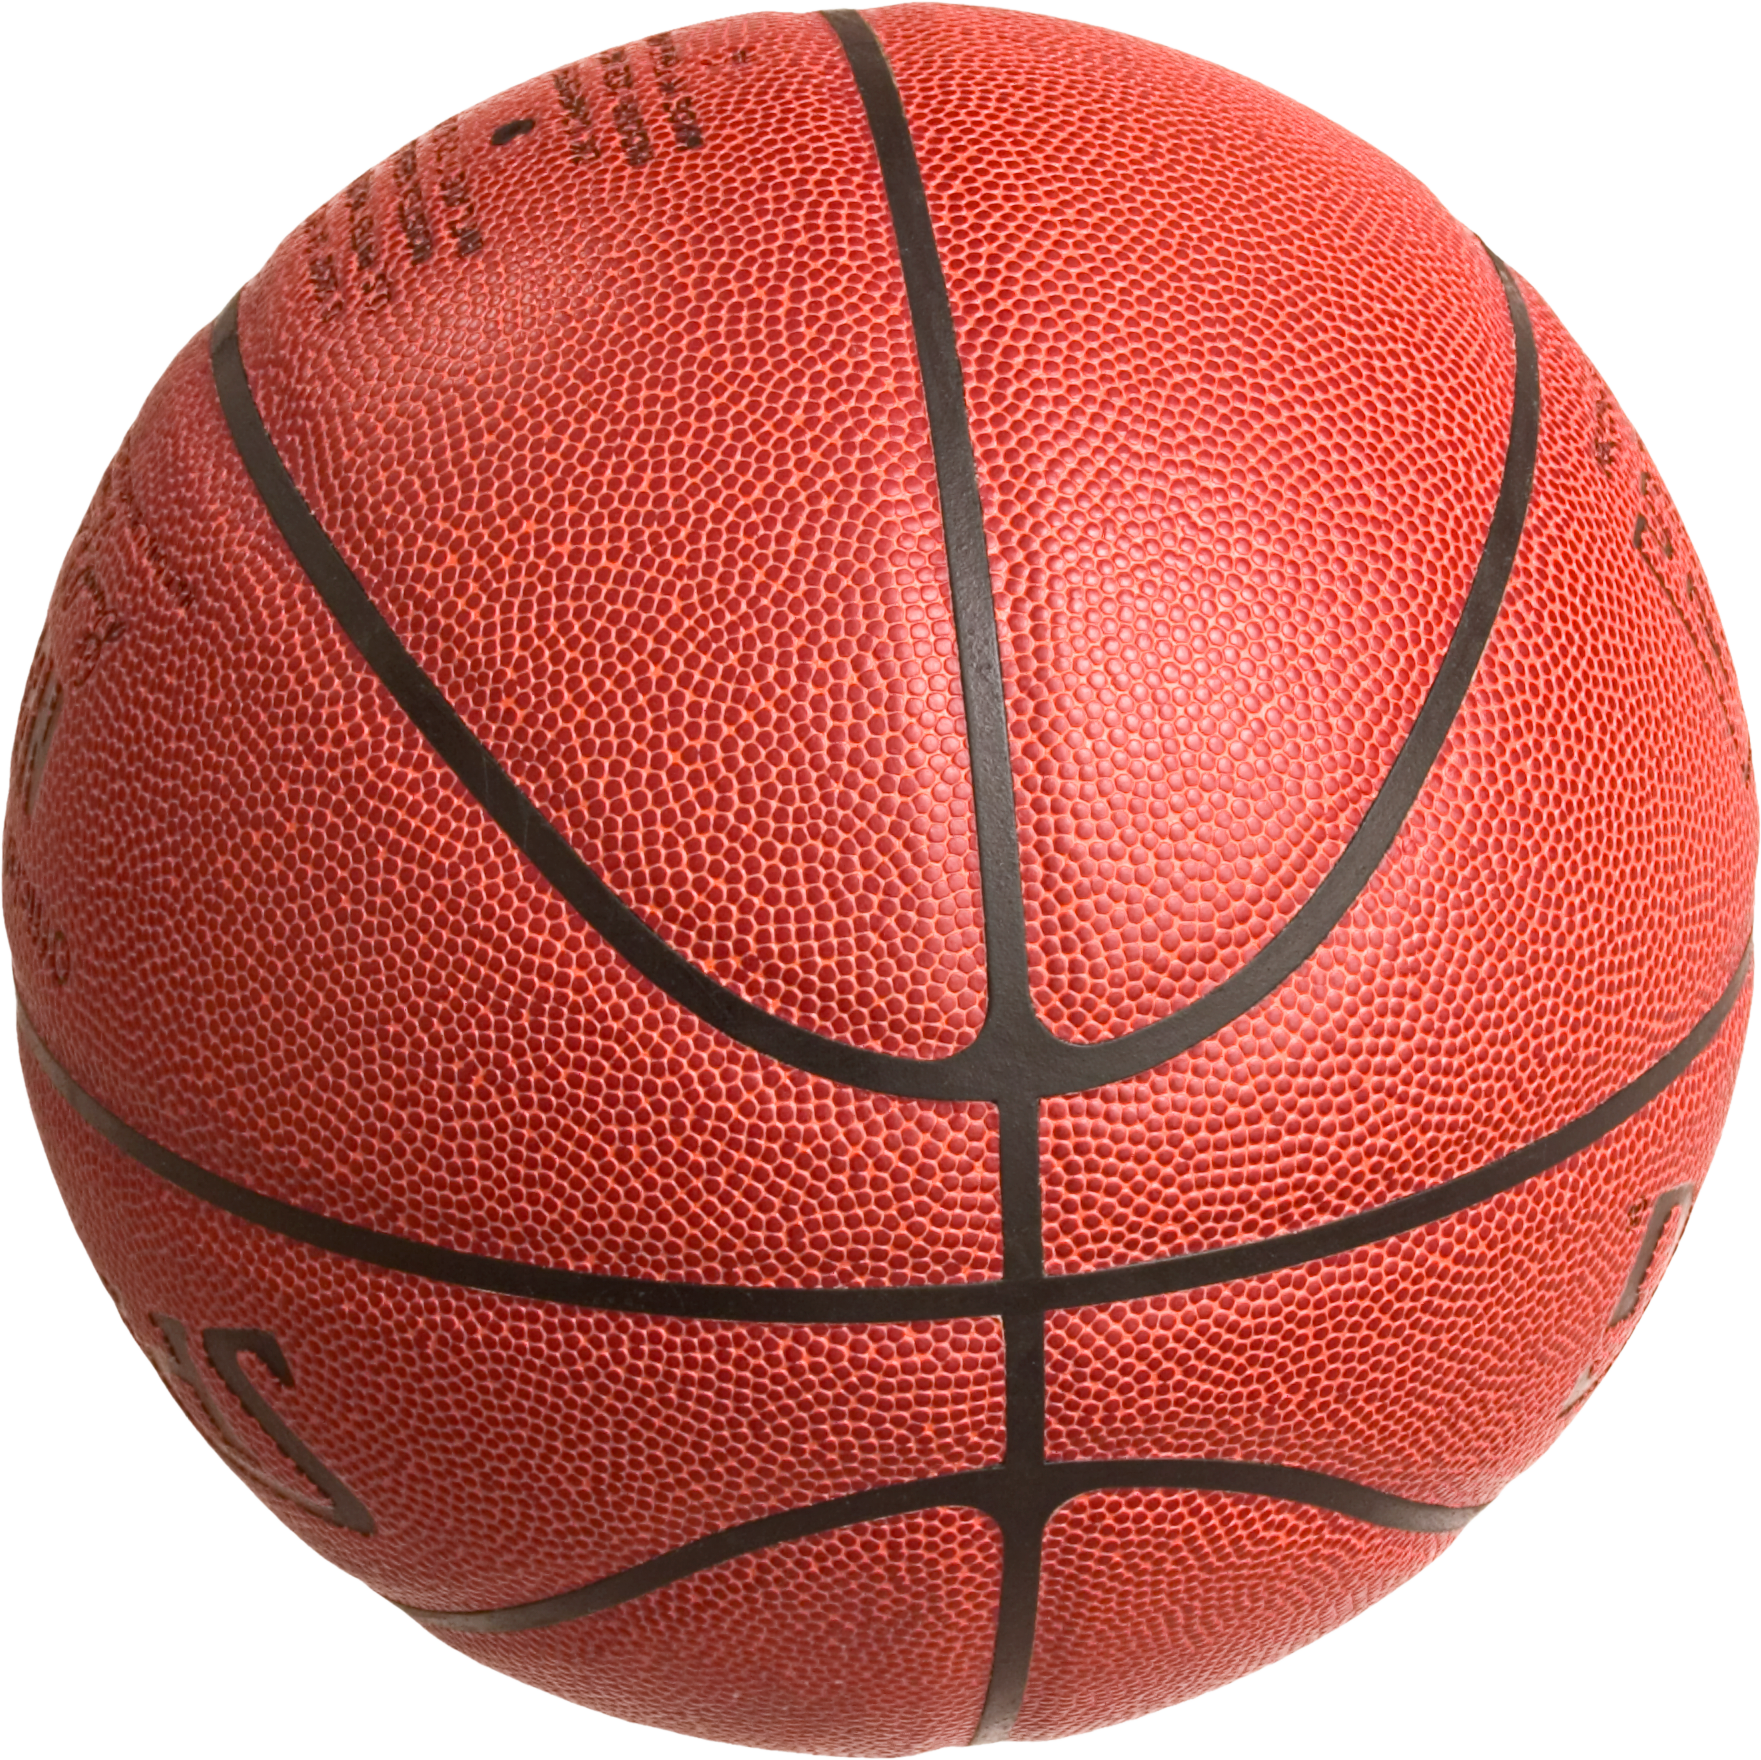 Youtube clipart basketball. Transparent png pictures free